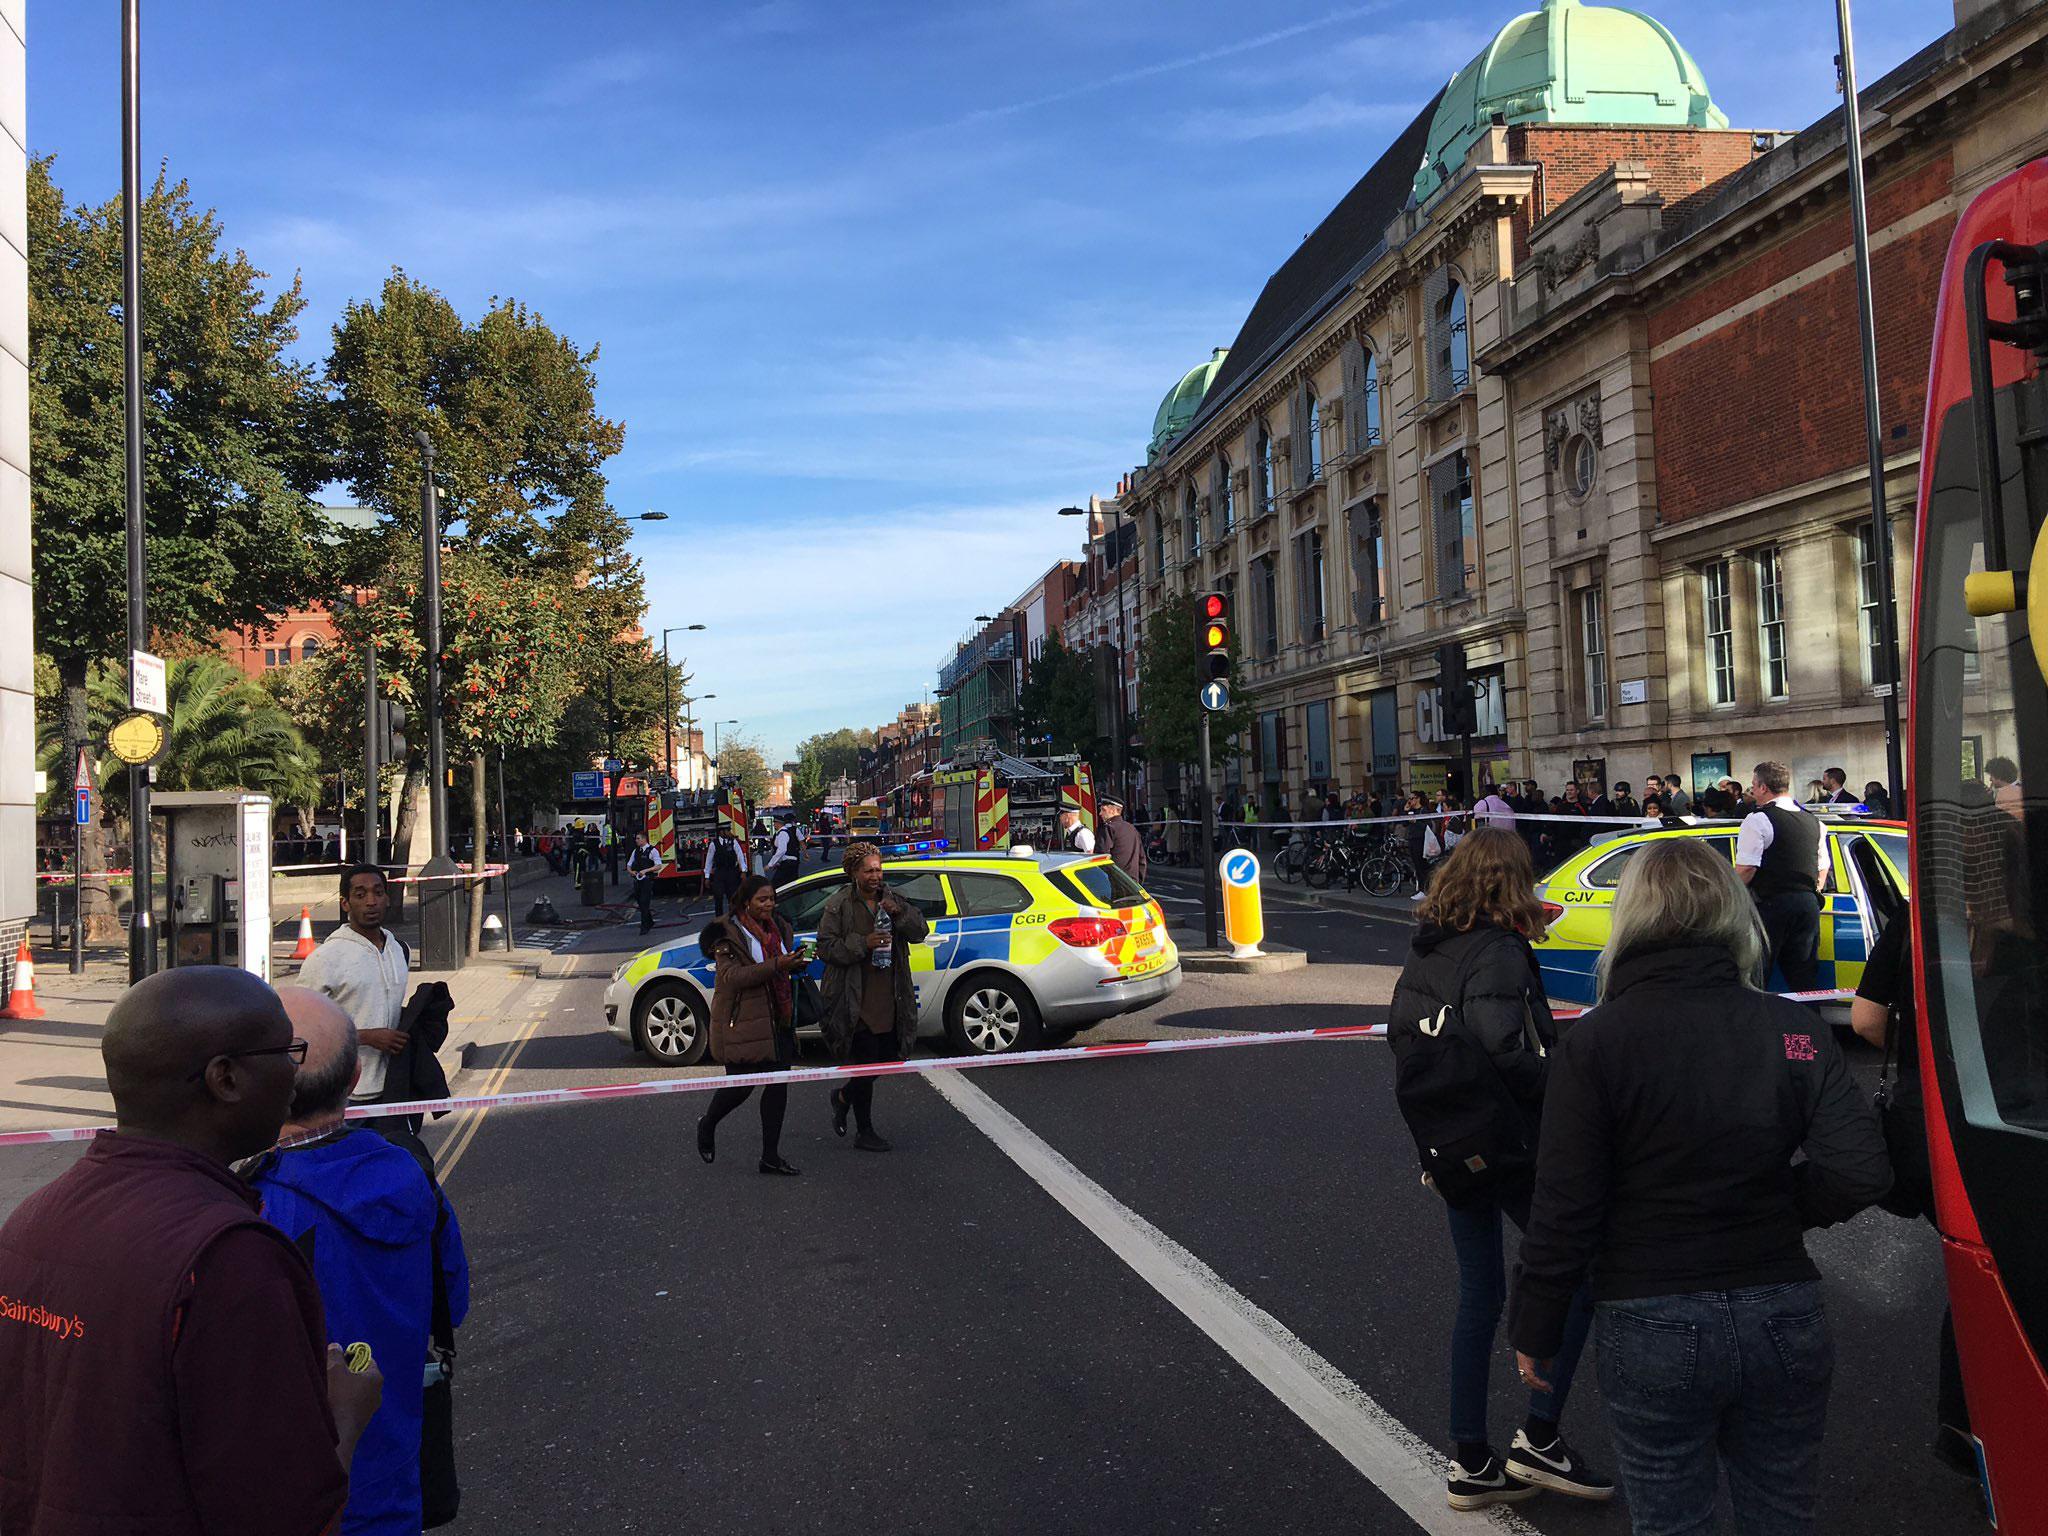 Mare Street has been cordoned off by police and residents have been advised to avoid the area